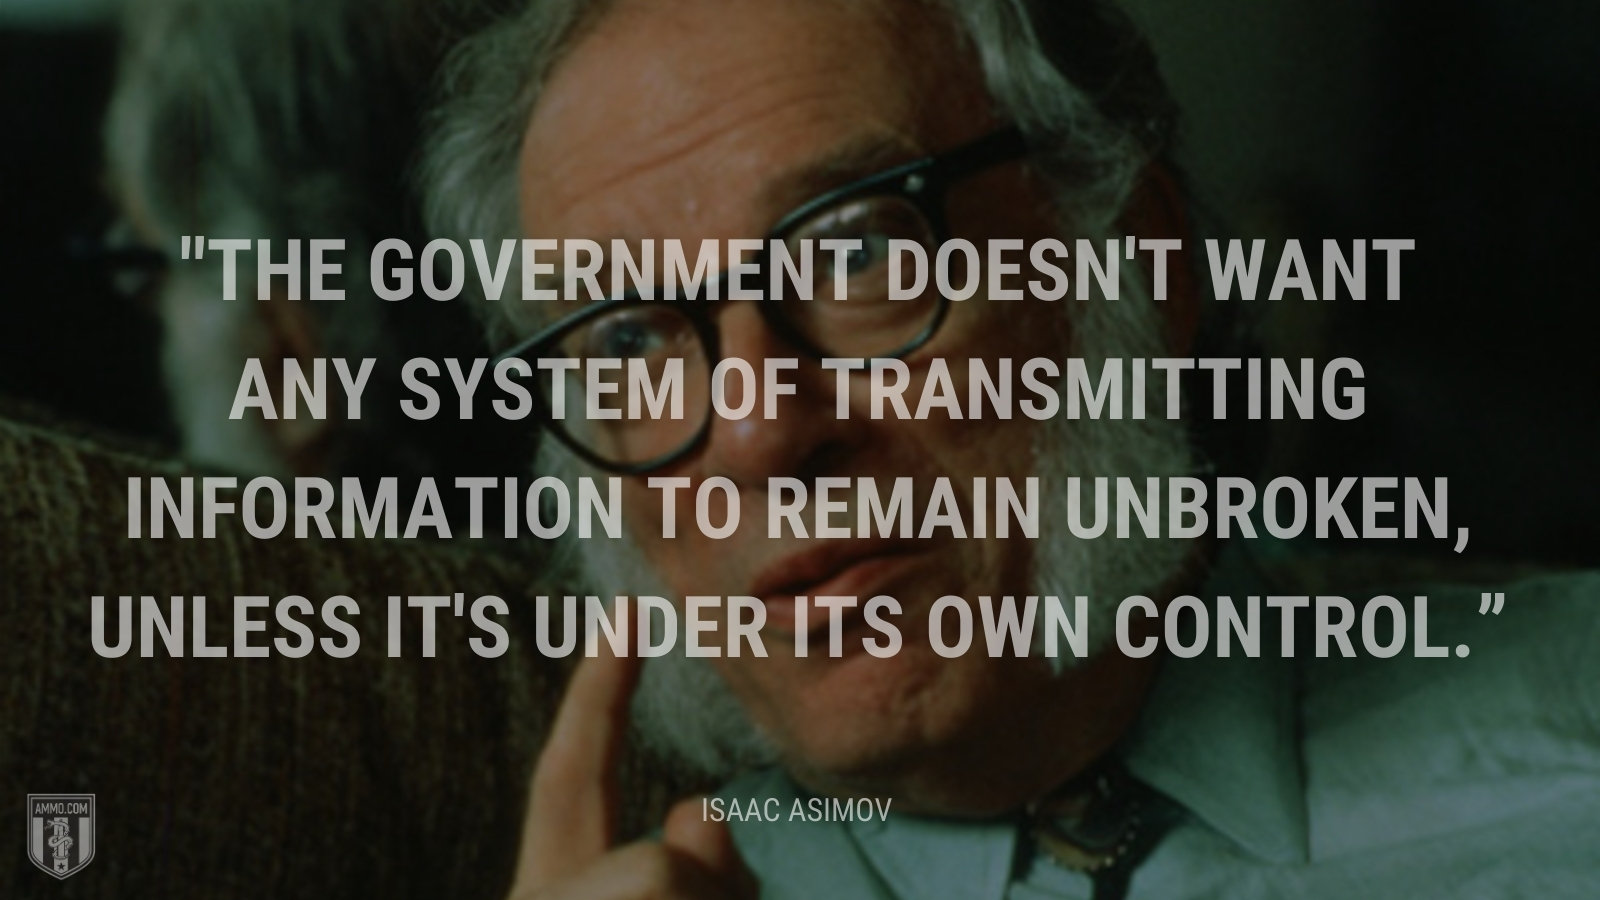 “The government doesn't want any system of transmitting information to remain unbroken, unless it's under its own control.” - Isaac Asimov